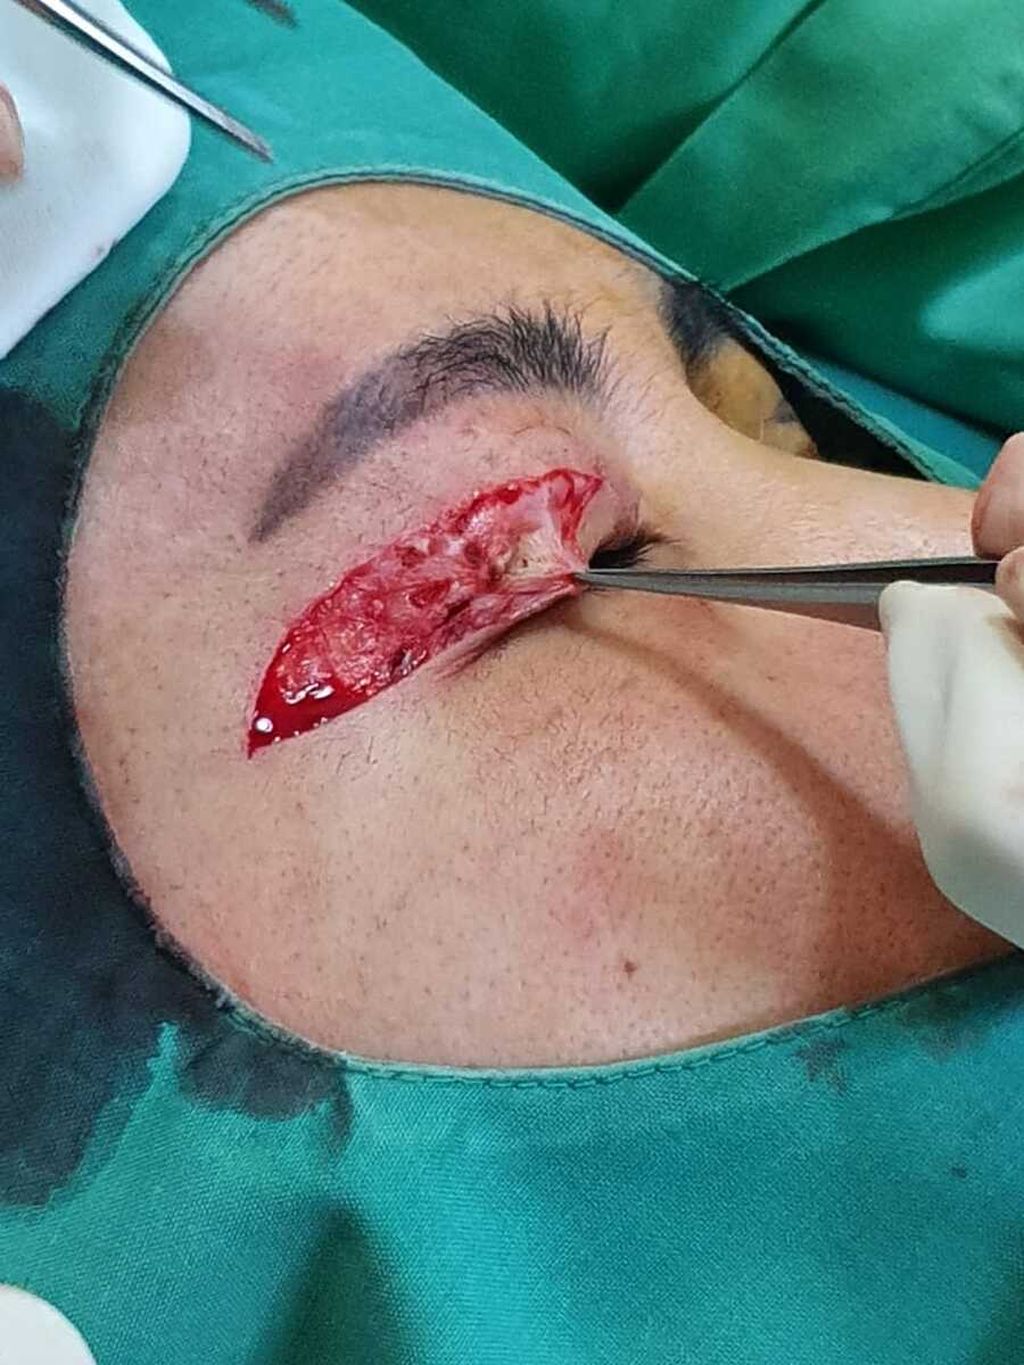 Documentation of RA (35) eyelid surgery performed by a general practitioner at his home in the Ancol area, North Jakarta in December 2020.